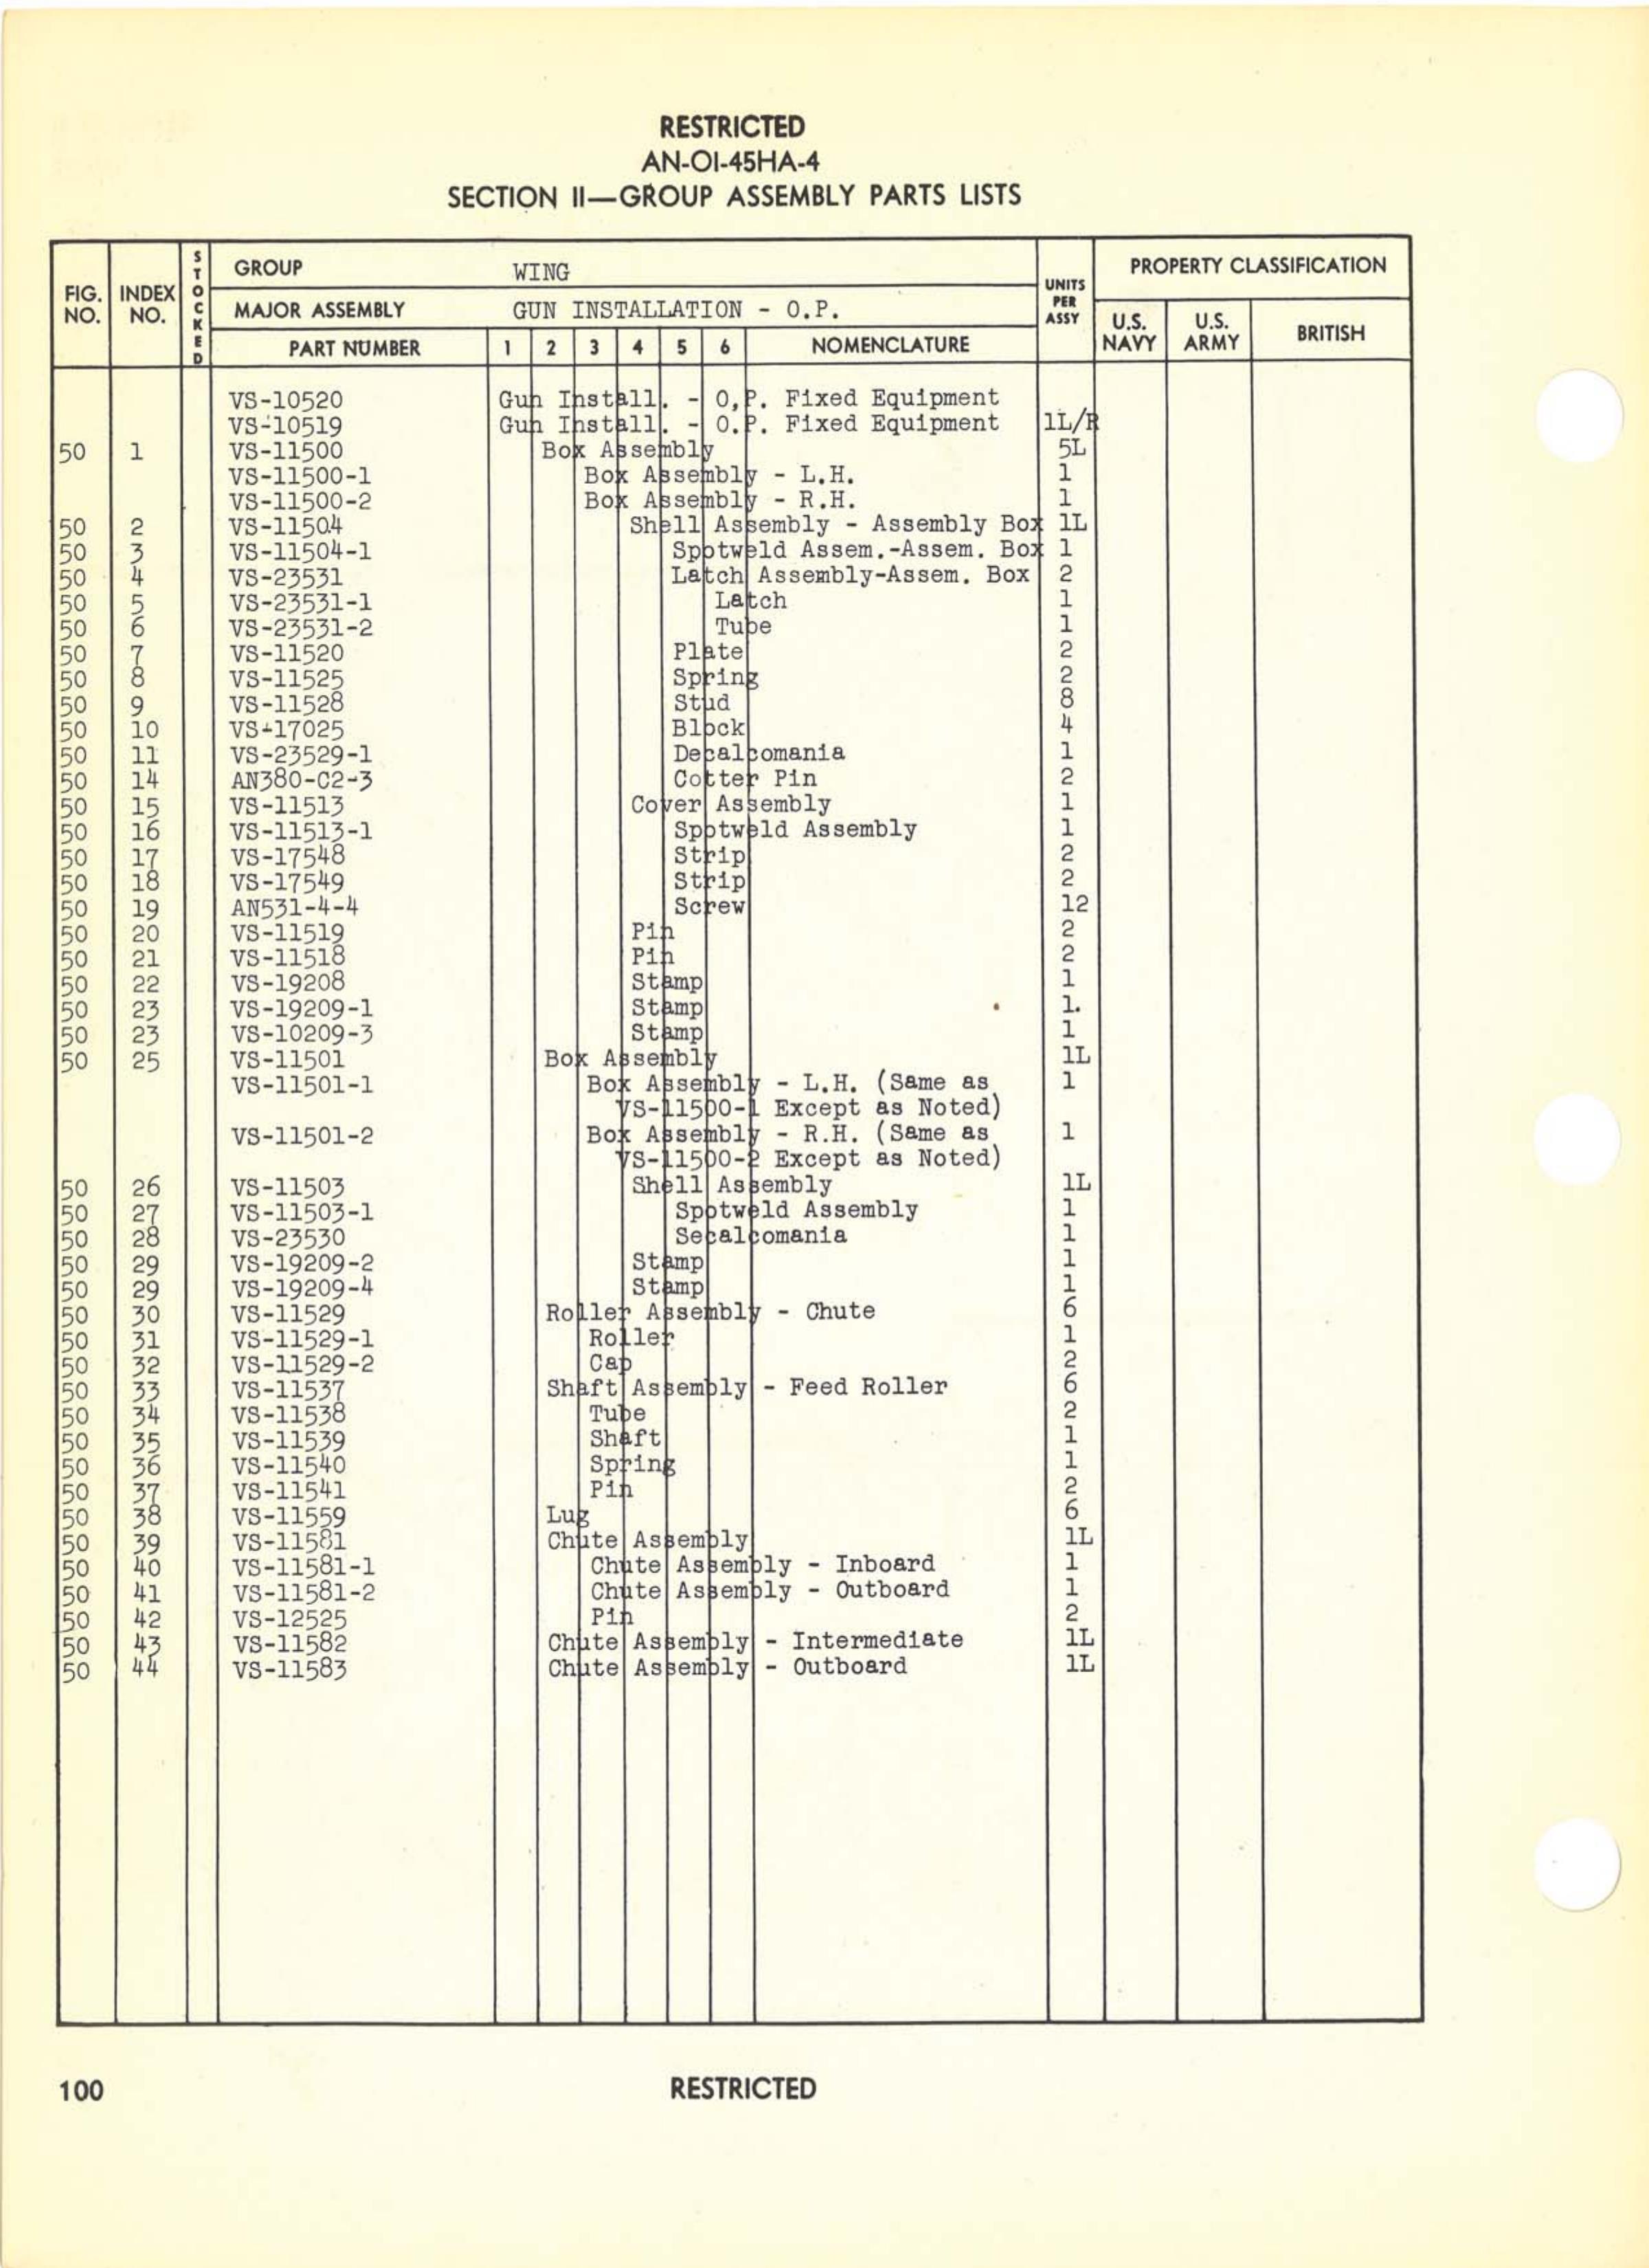 Sample page 107 from AirCorps Library document: Parts Catalog - F4U-1, F3A-1, FG-1